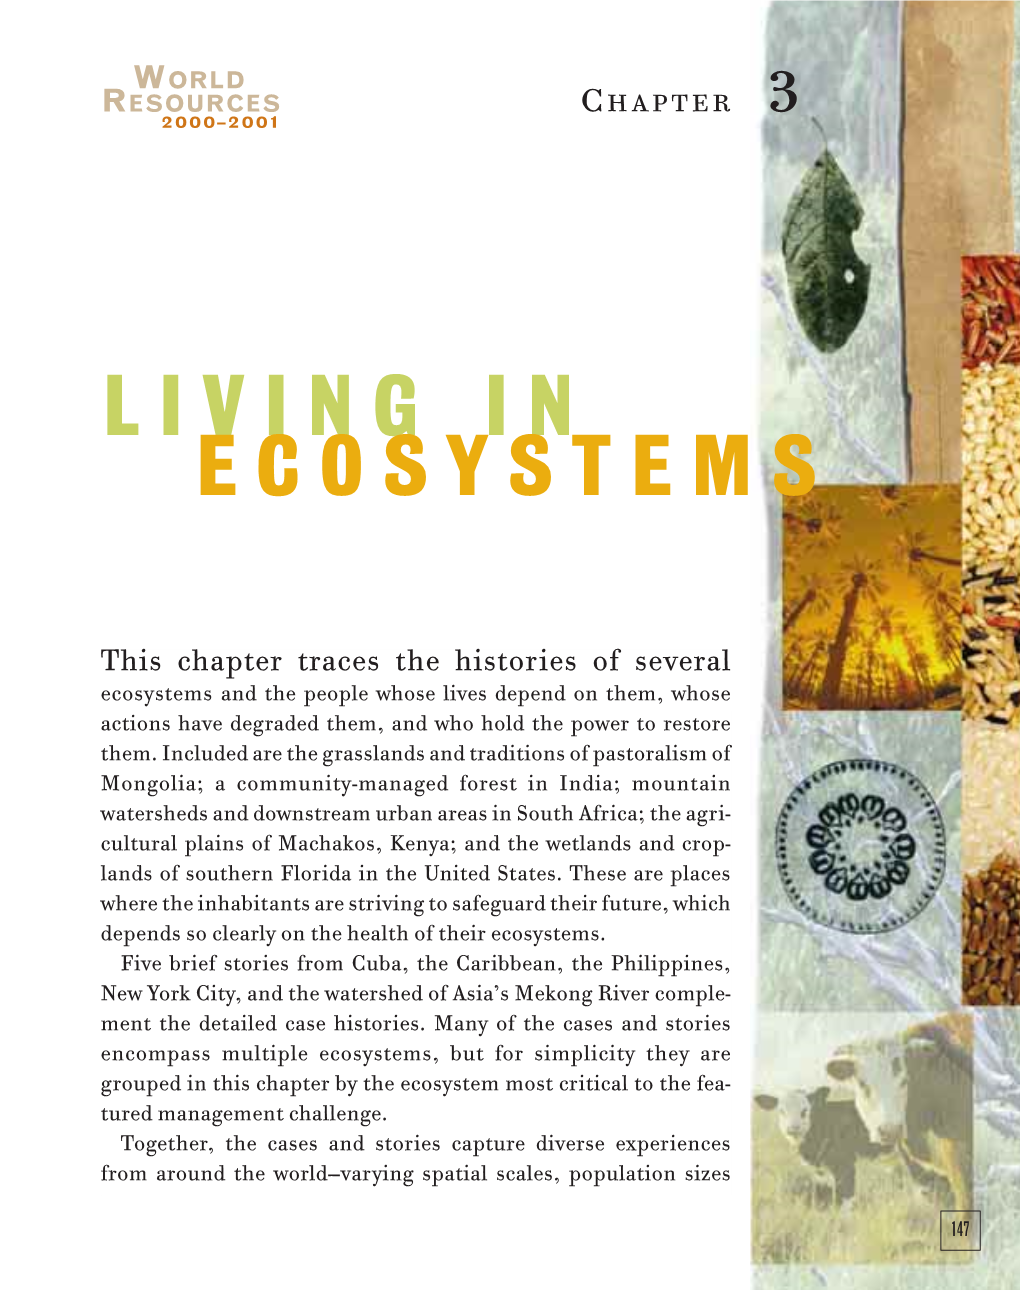 Living in Ecosystems